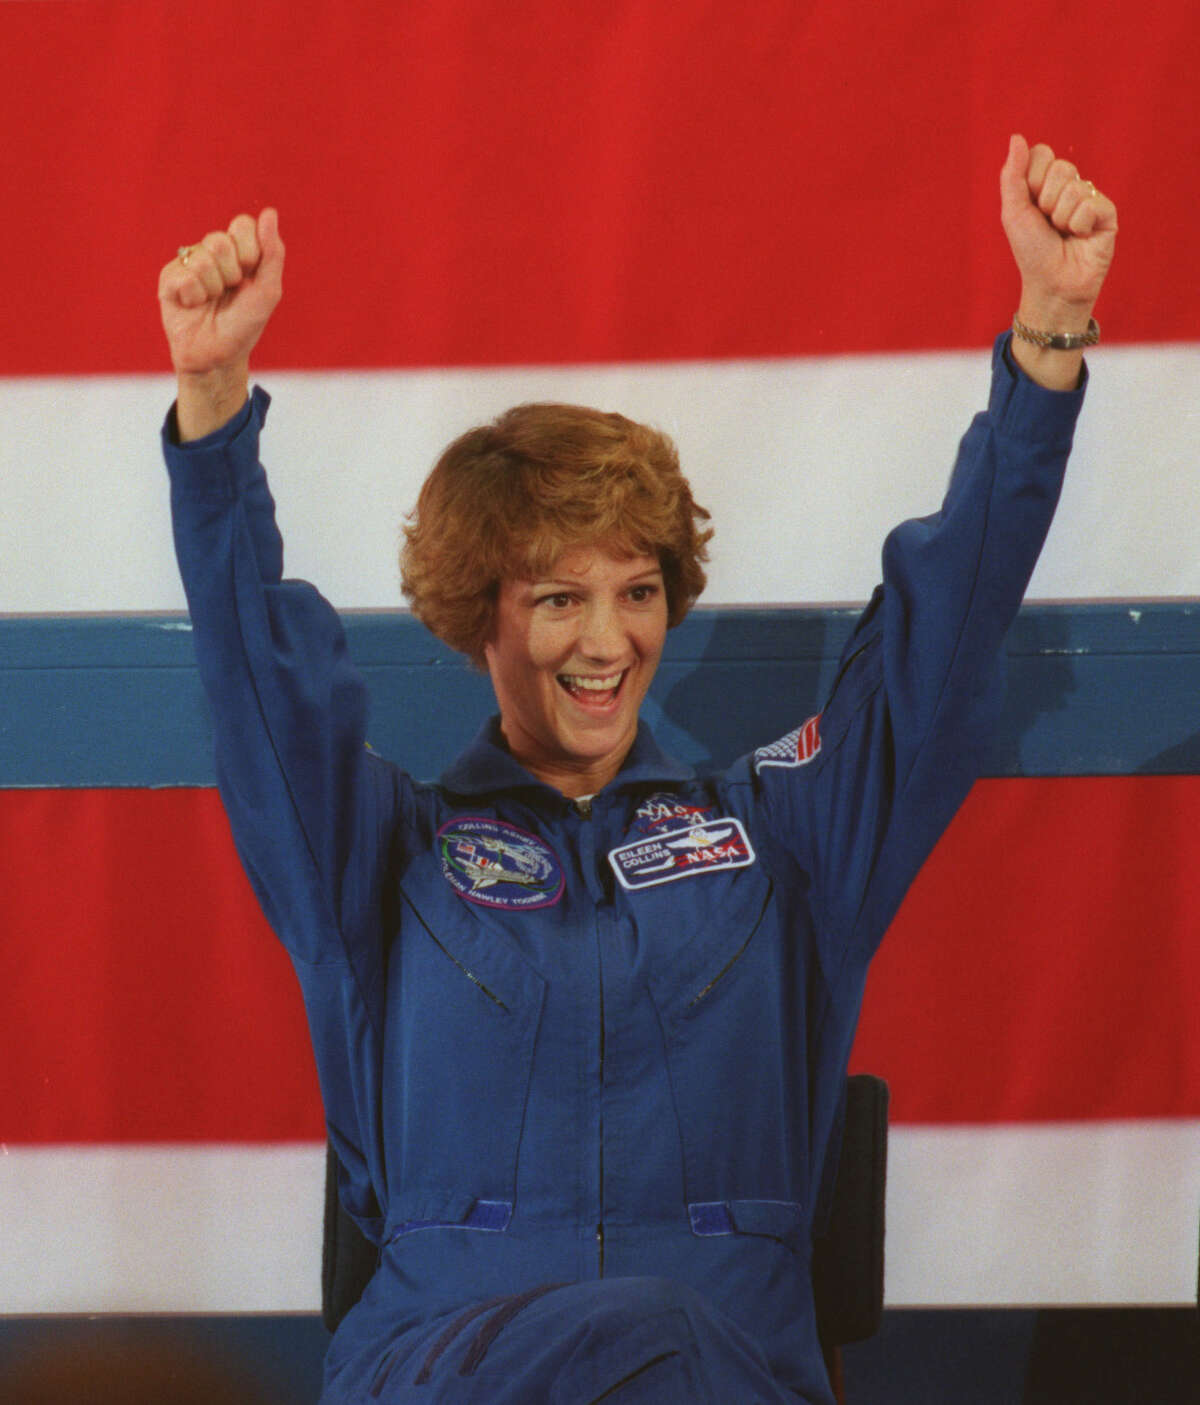 Air Force Col. Eileen Collins, the first female shuttle commander, responds to well-wishers at her welcome-home ceremony in 1999 at Ellington Field. Collins drew praise from NASA officials for guiding her colleagues through difficulties.